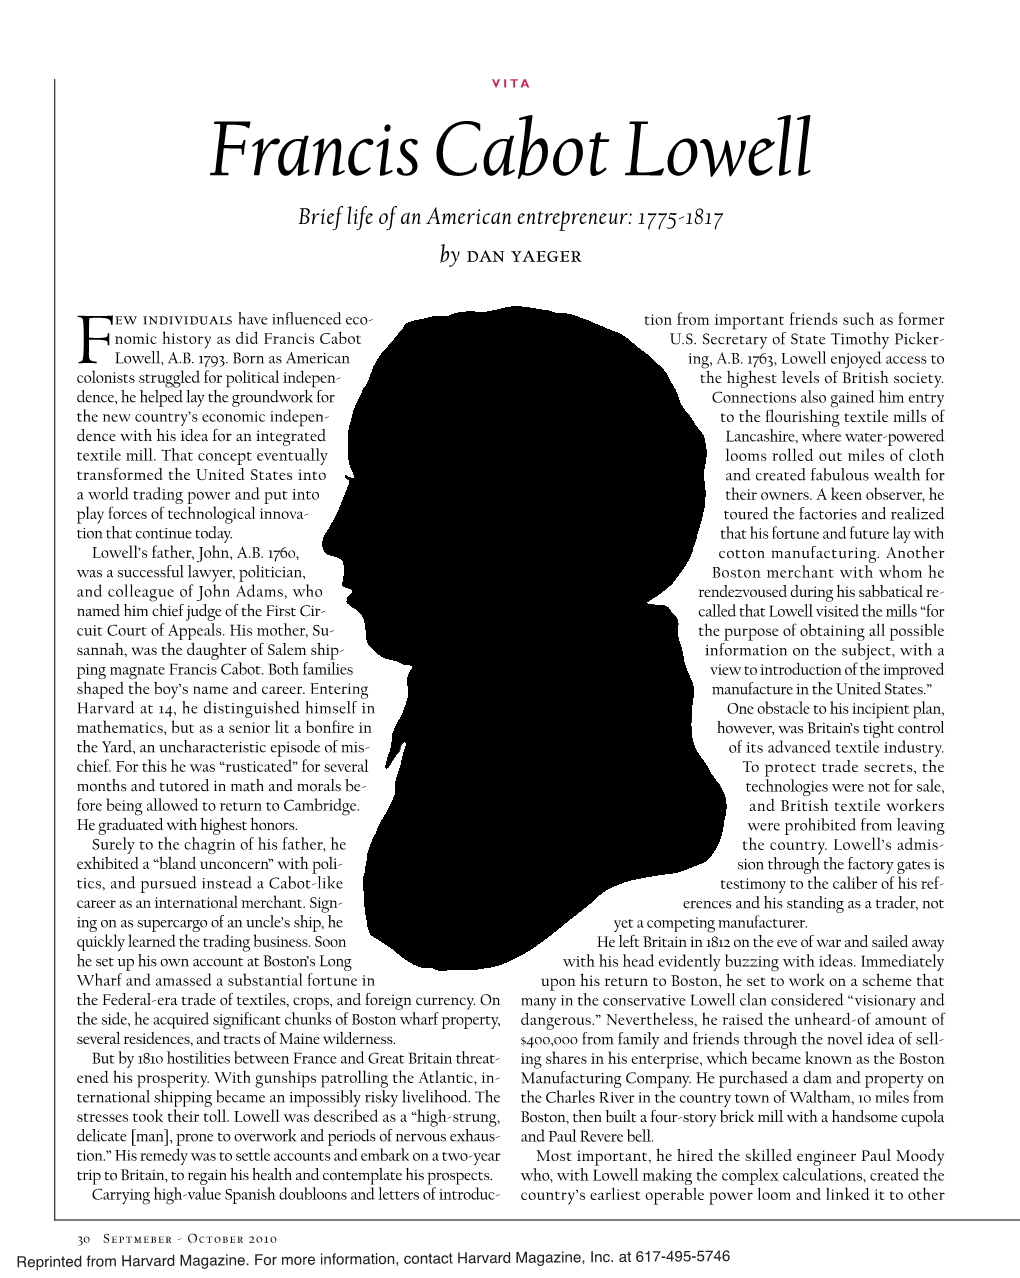 Francis Cabot Lowell Brief Life of an American Entrepreneur: 1775-1817 by Dan Yaeger